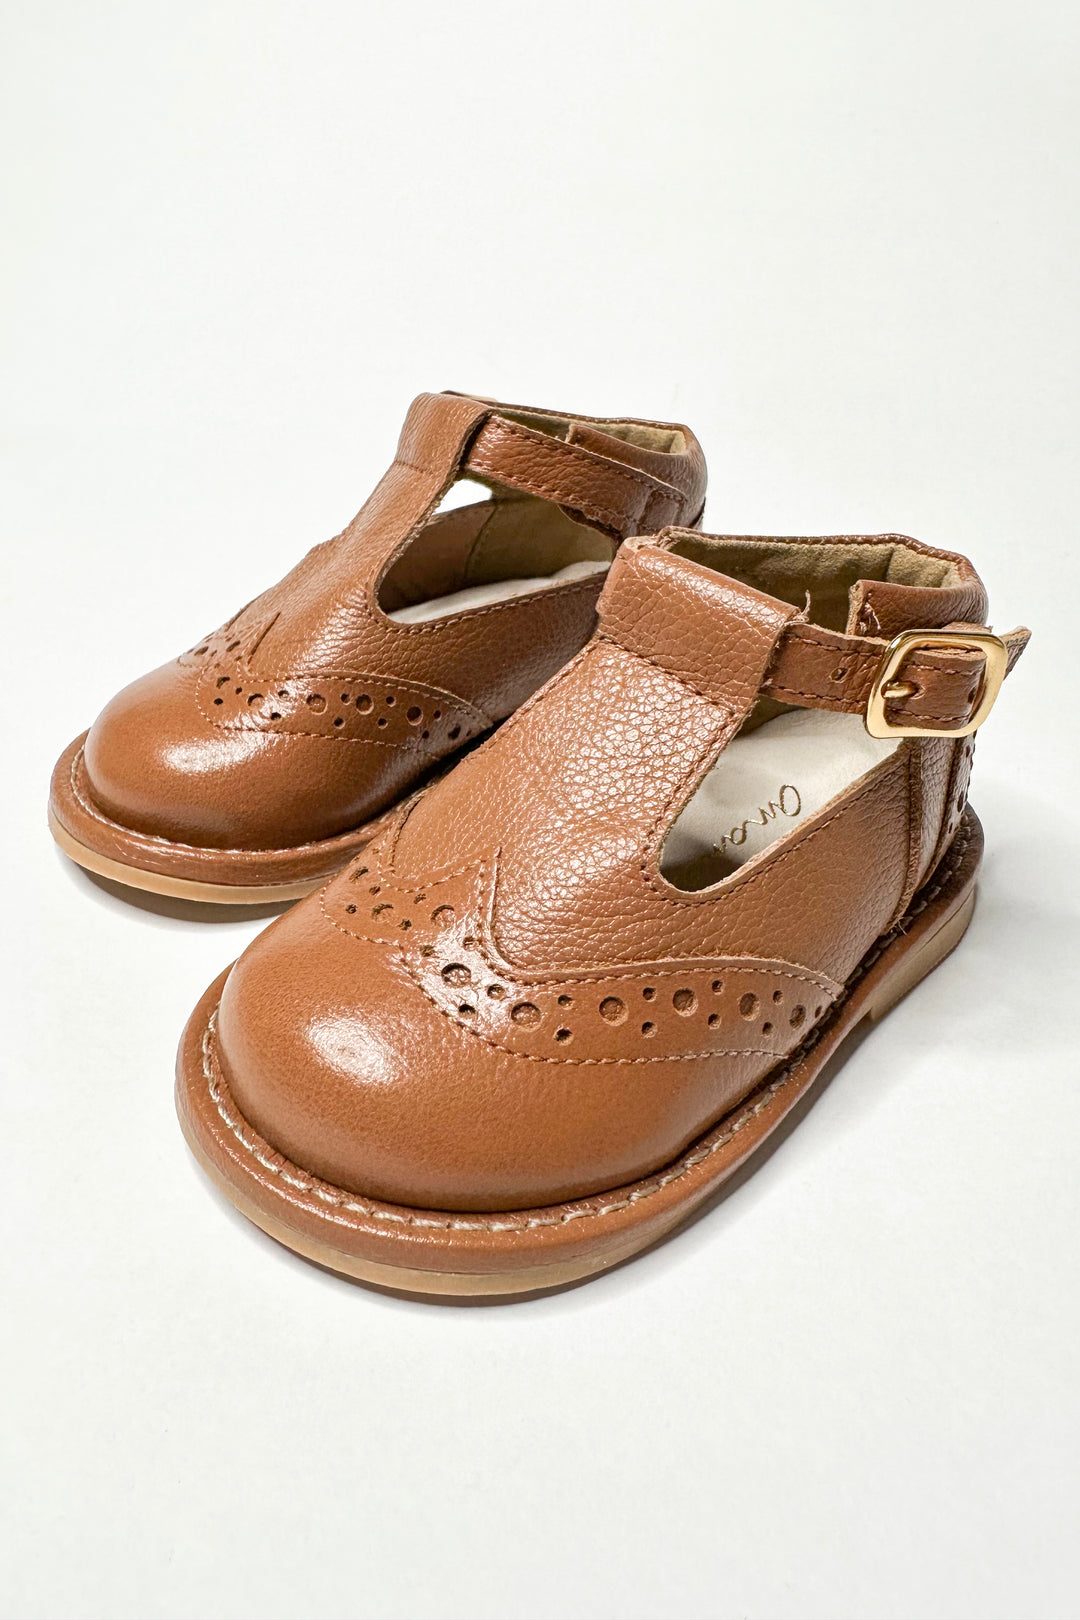 Ananás Petit "Woody" Camel Leather Shoes | iphoneandroidapplications